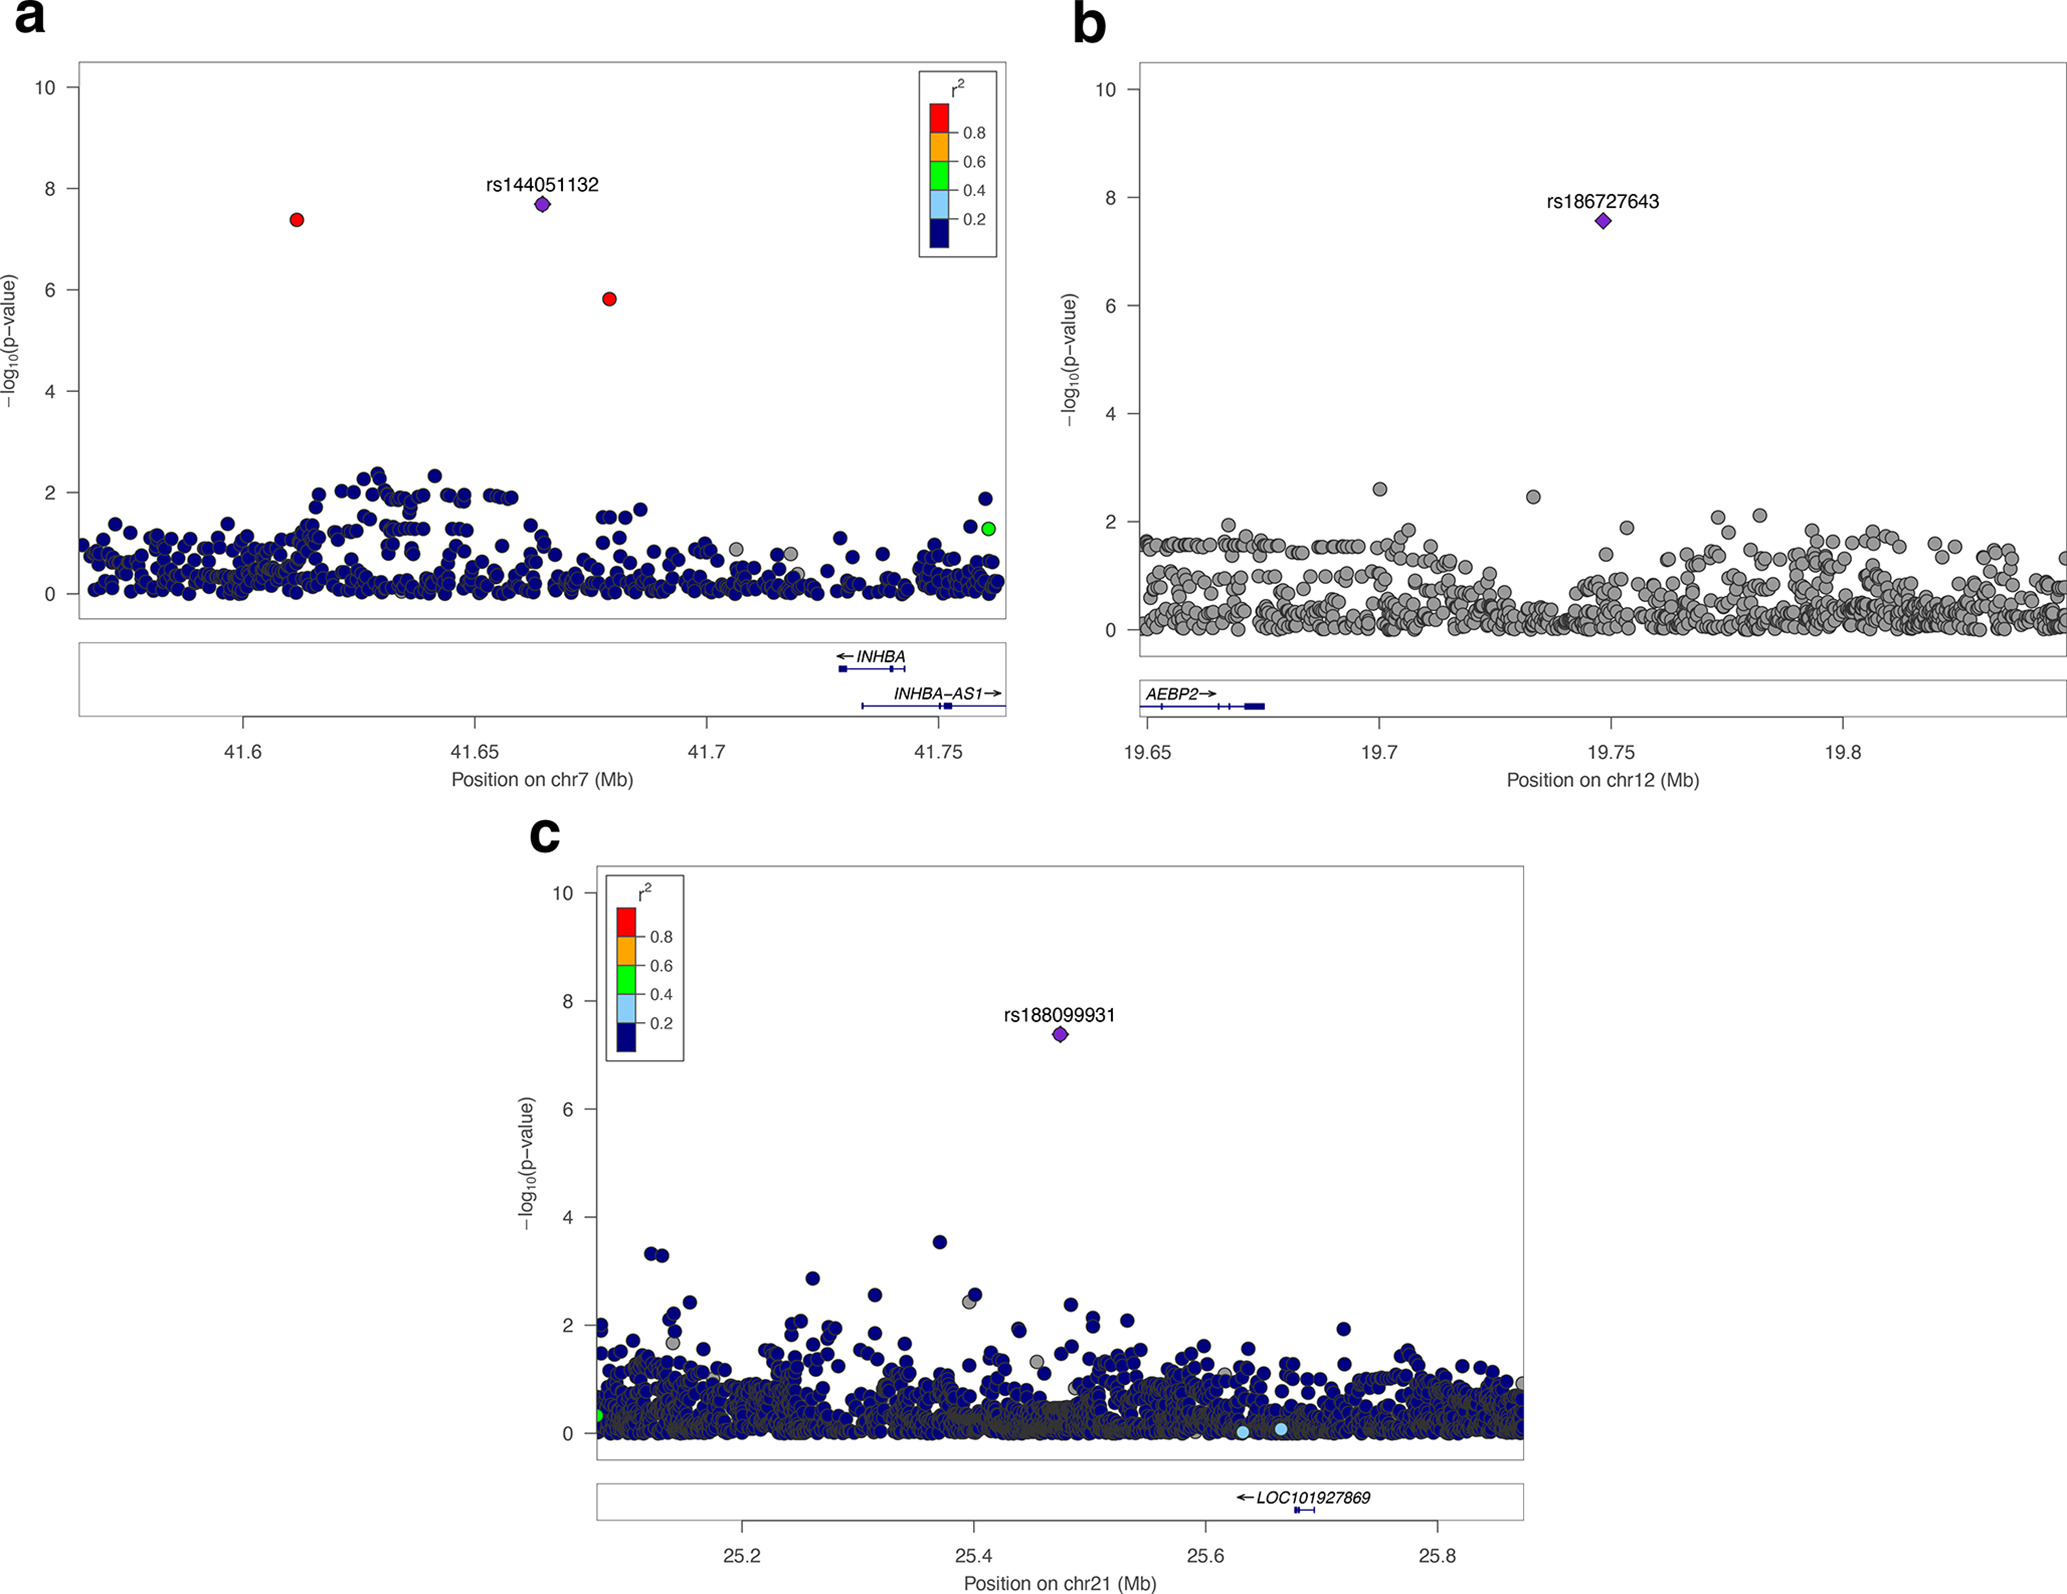 Fig. 1 
            Regional-association plots. Tested SNPs are arranged by genomic position around the lead SNP (purple diamond). The y-axis indicates -log10 p-values for association with ACL and PCL injury for each SNP. The color of dots of the flanking SNPs indicates their linkage disequilibrium (R2) with the lead SNP as indicated by the heat map color key. a) Regional-association plot for rs144051132 with ACL and PCL injury, which is located in the 3’ region of INHBA. b) Regional-association plot for rs186727643 with ACL and PCL injury, which is located in the 3’ region of the AEBP2 gene. c) Regional-association plot for rs188099931 with ACL and PCL injury, which is located in the 3’ region of the LOC101927869 gene.
          